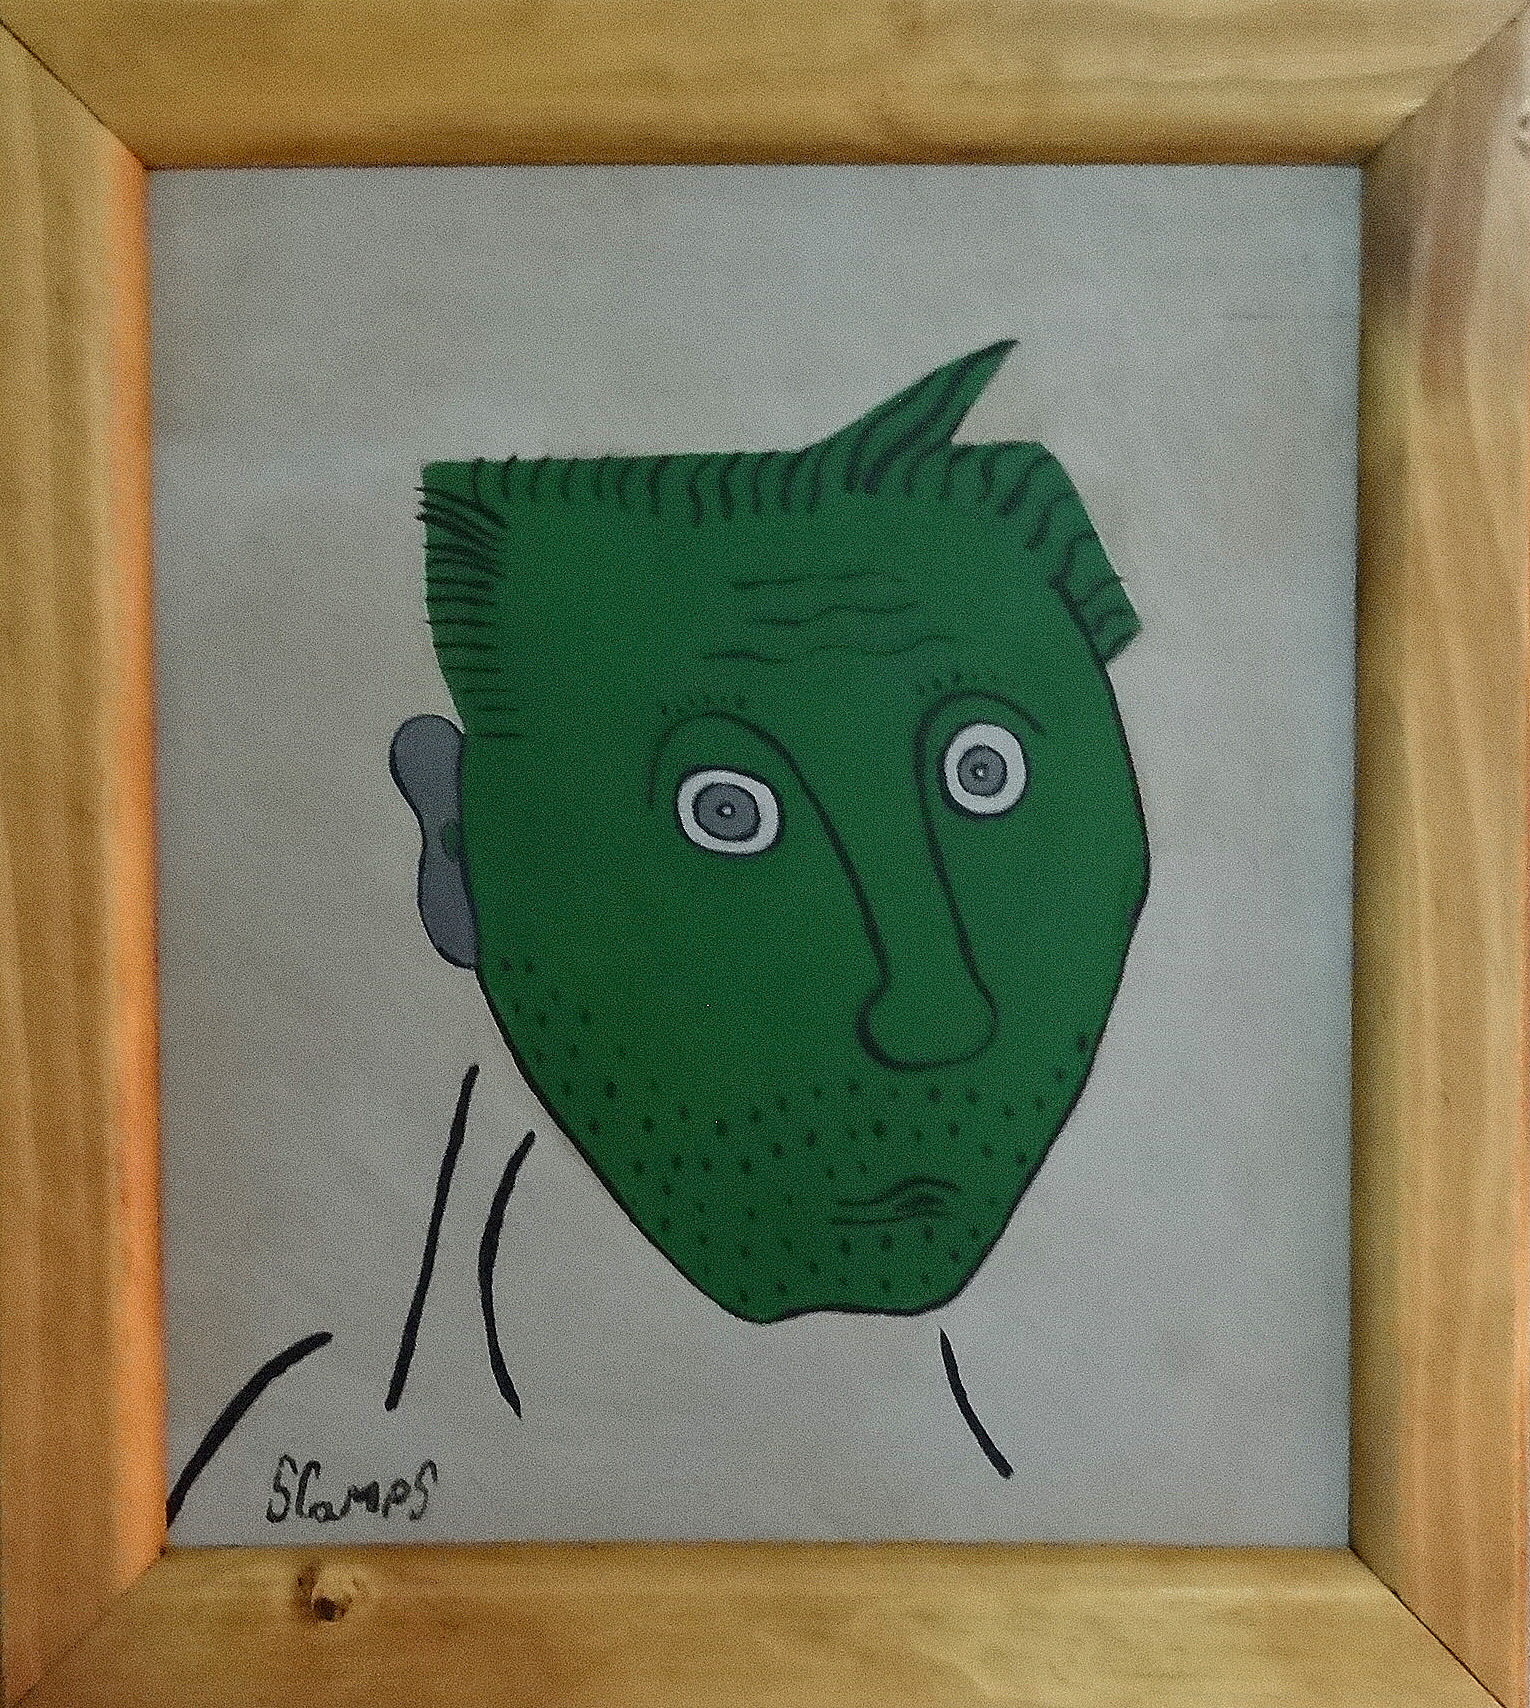 Steve CAMPS (British b. 1957) Green Headed Man Oil on board Signed lower left Framed Picture size 33 - Image 2 of 3